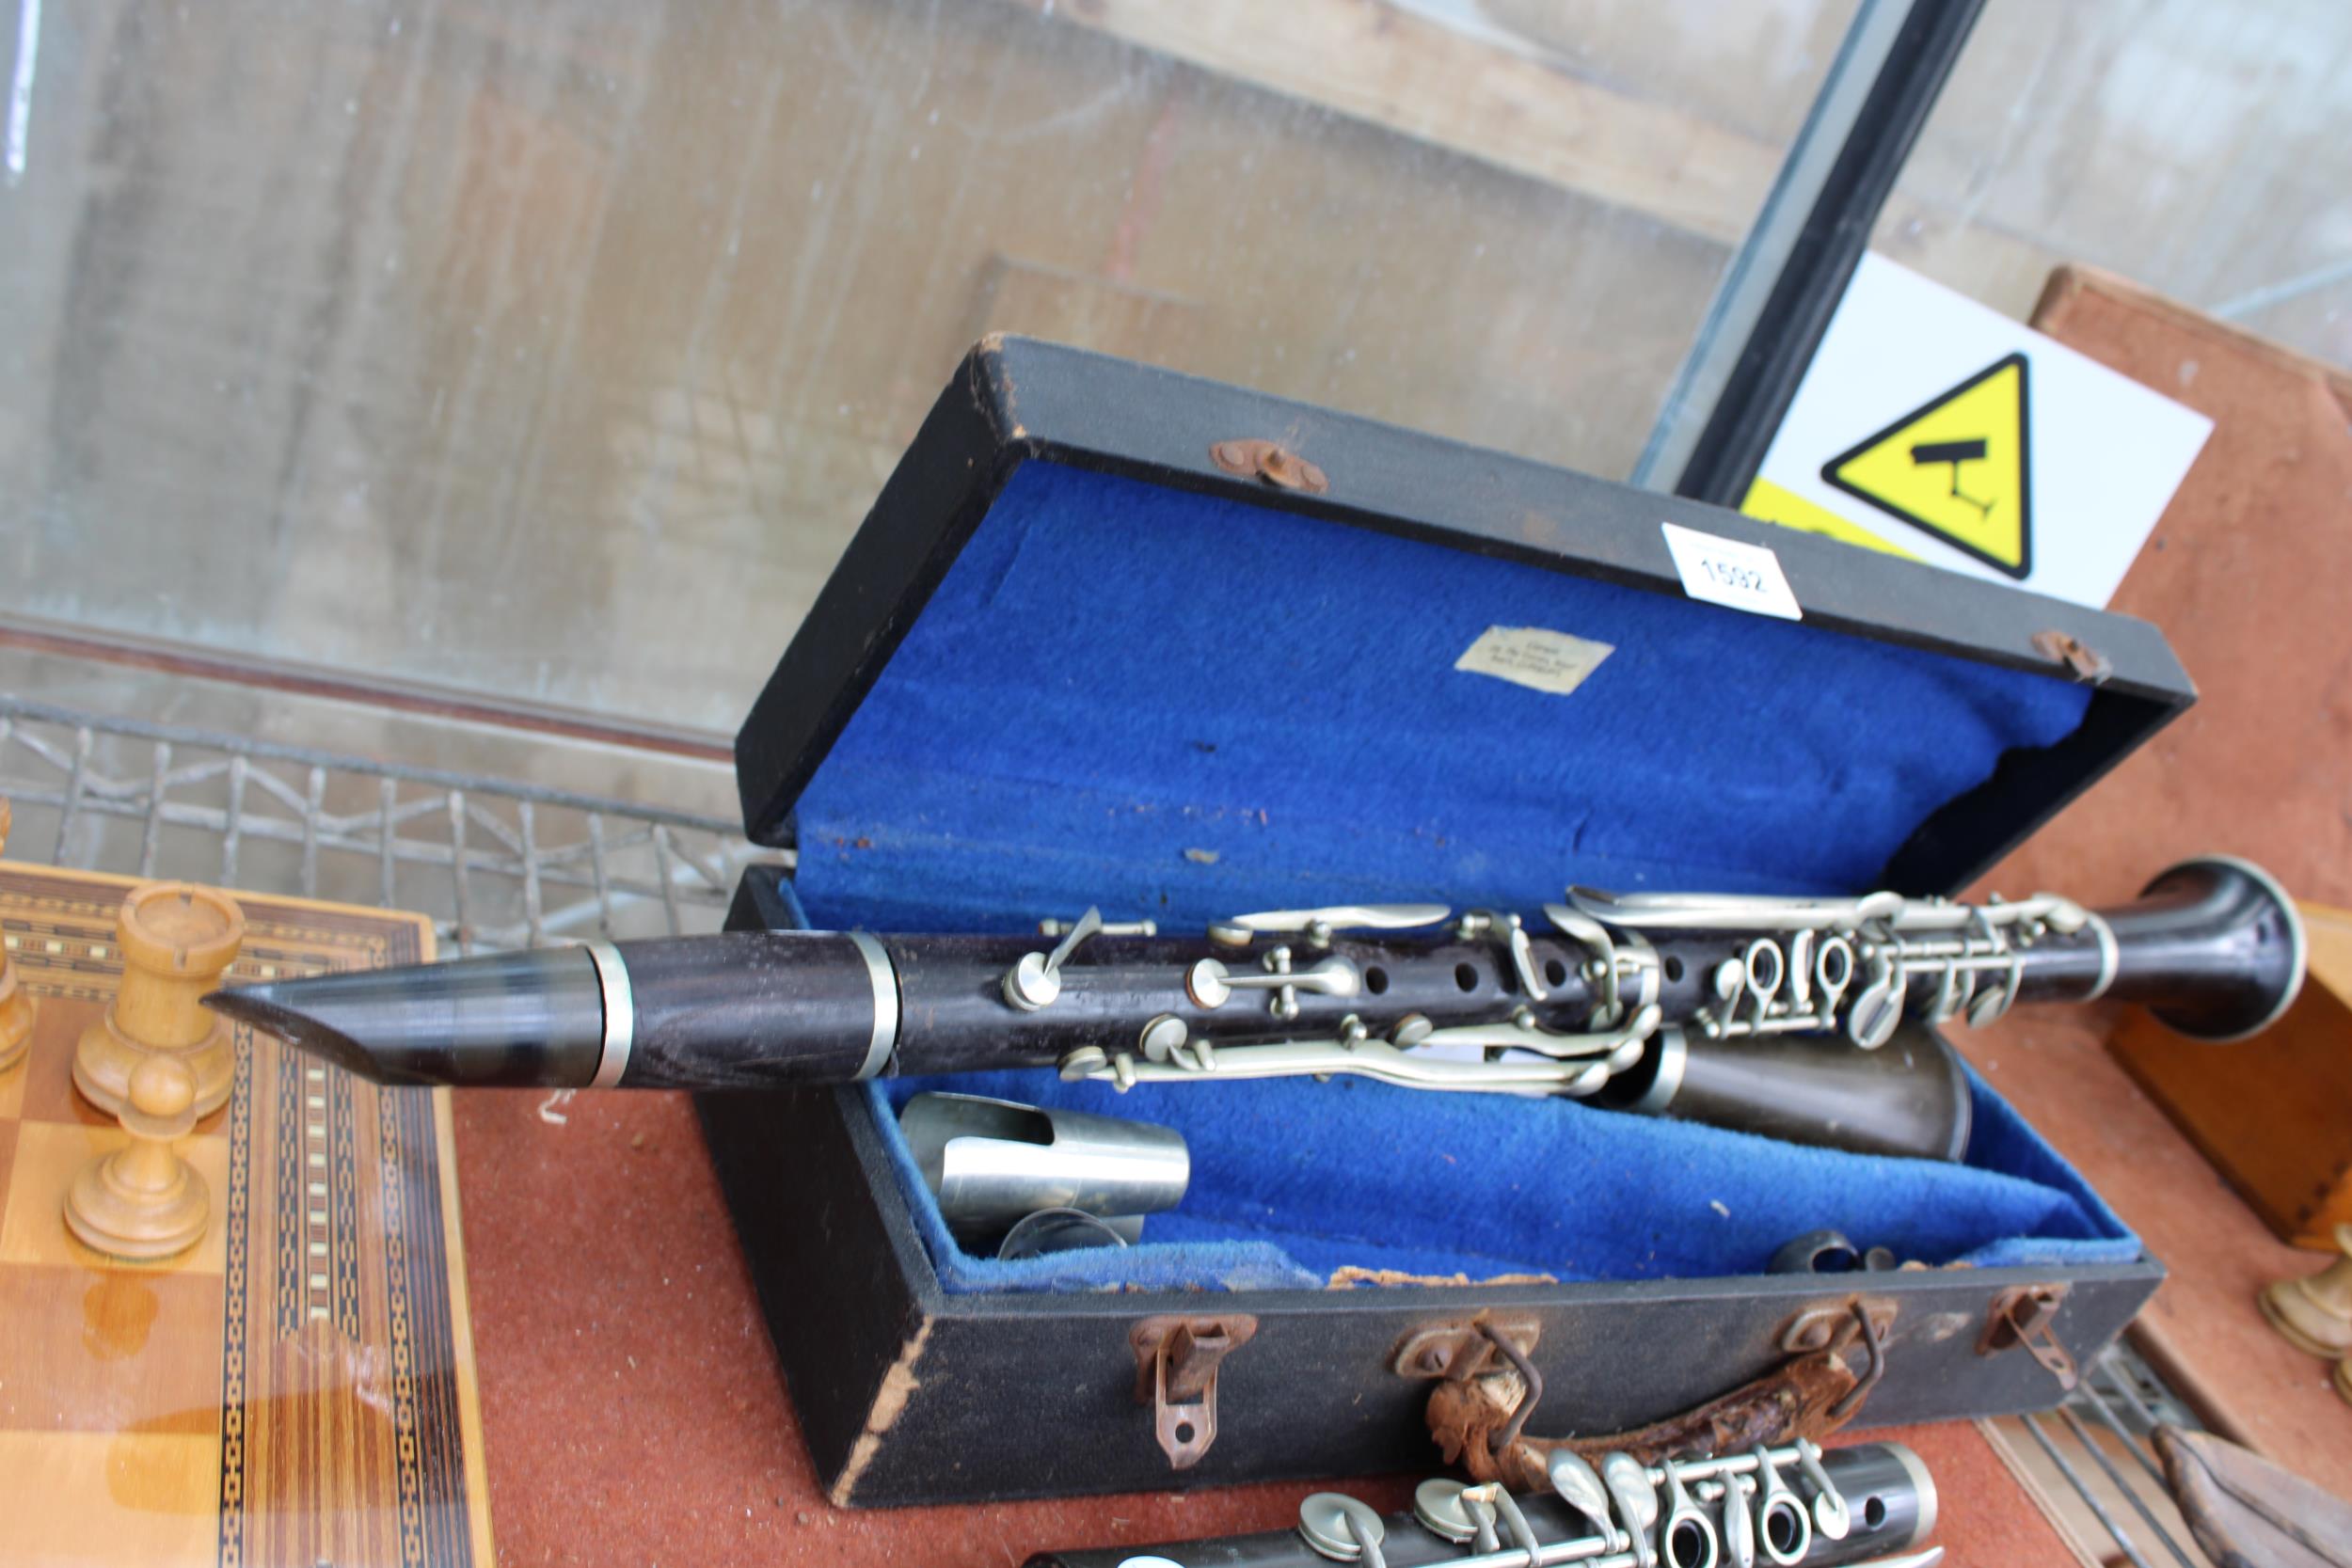 A BELIEVED COMPLETE VINTAGE JACQUES ALBERT CLARINET WITH CARRY CASE AND AN ASSORTMENT OF BOOZY - Image 3 of 3